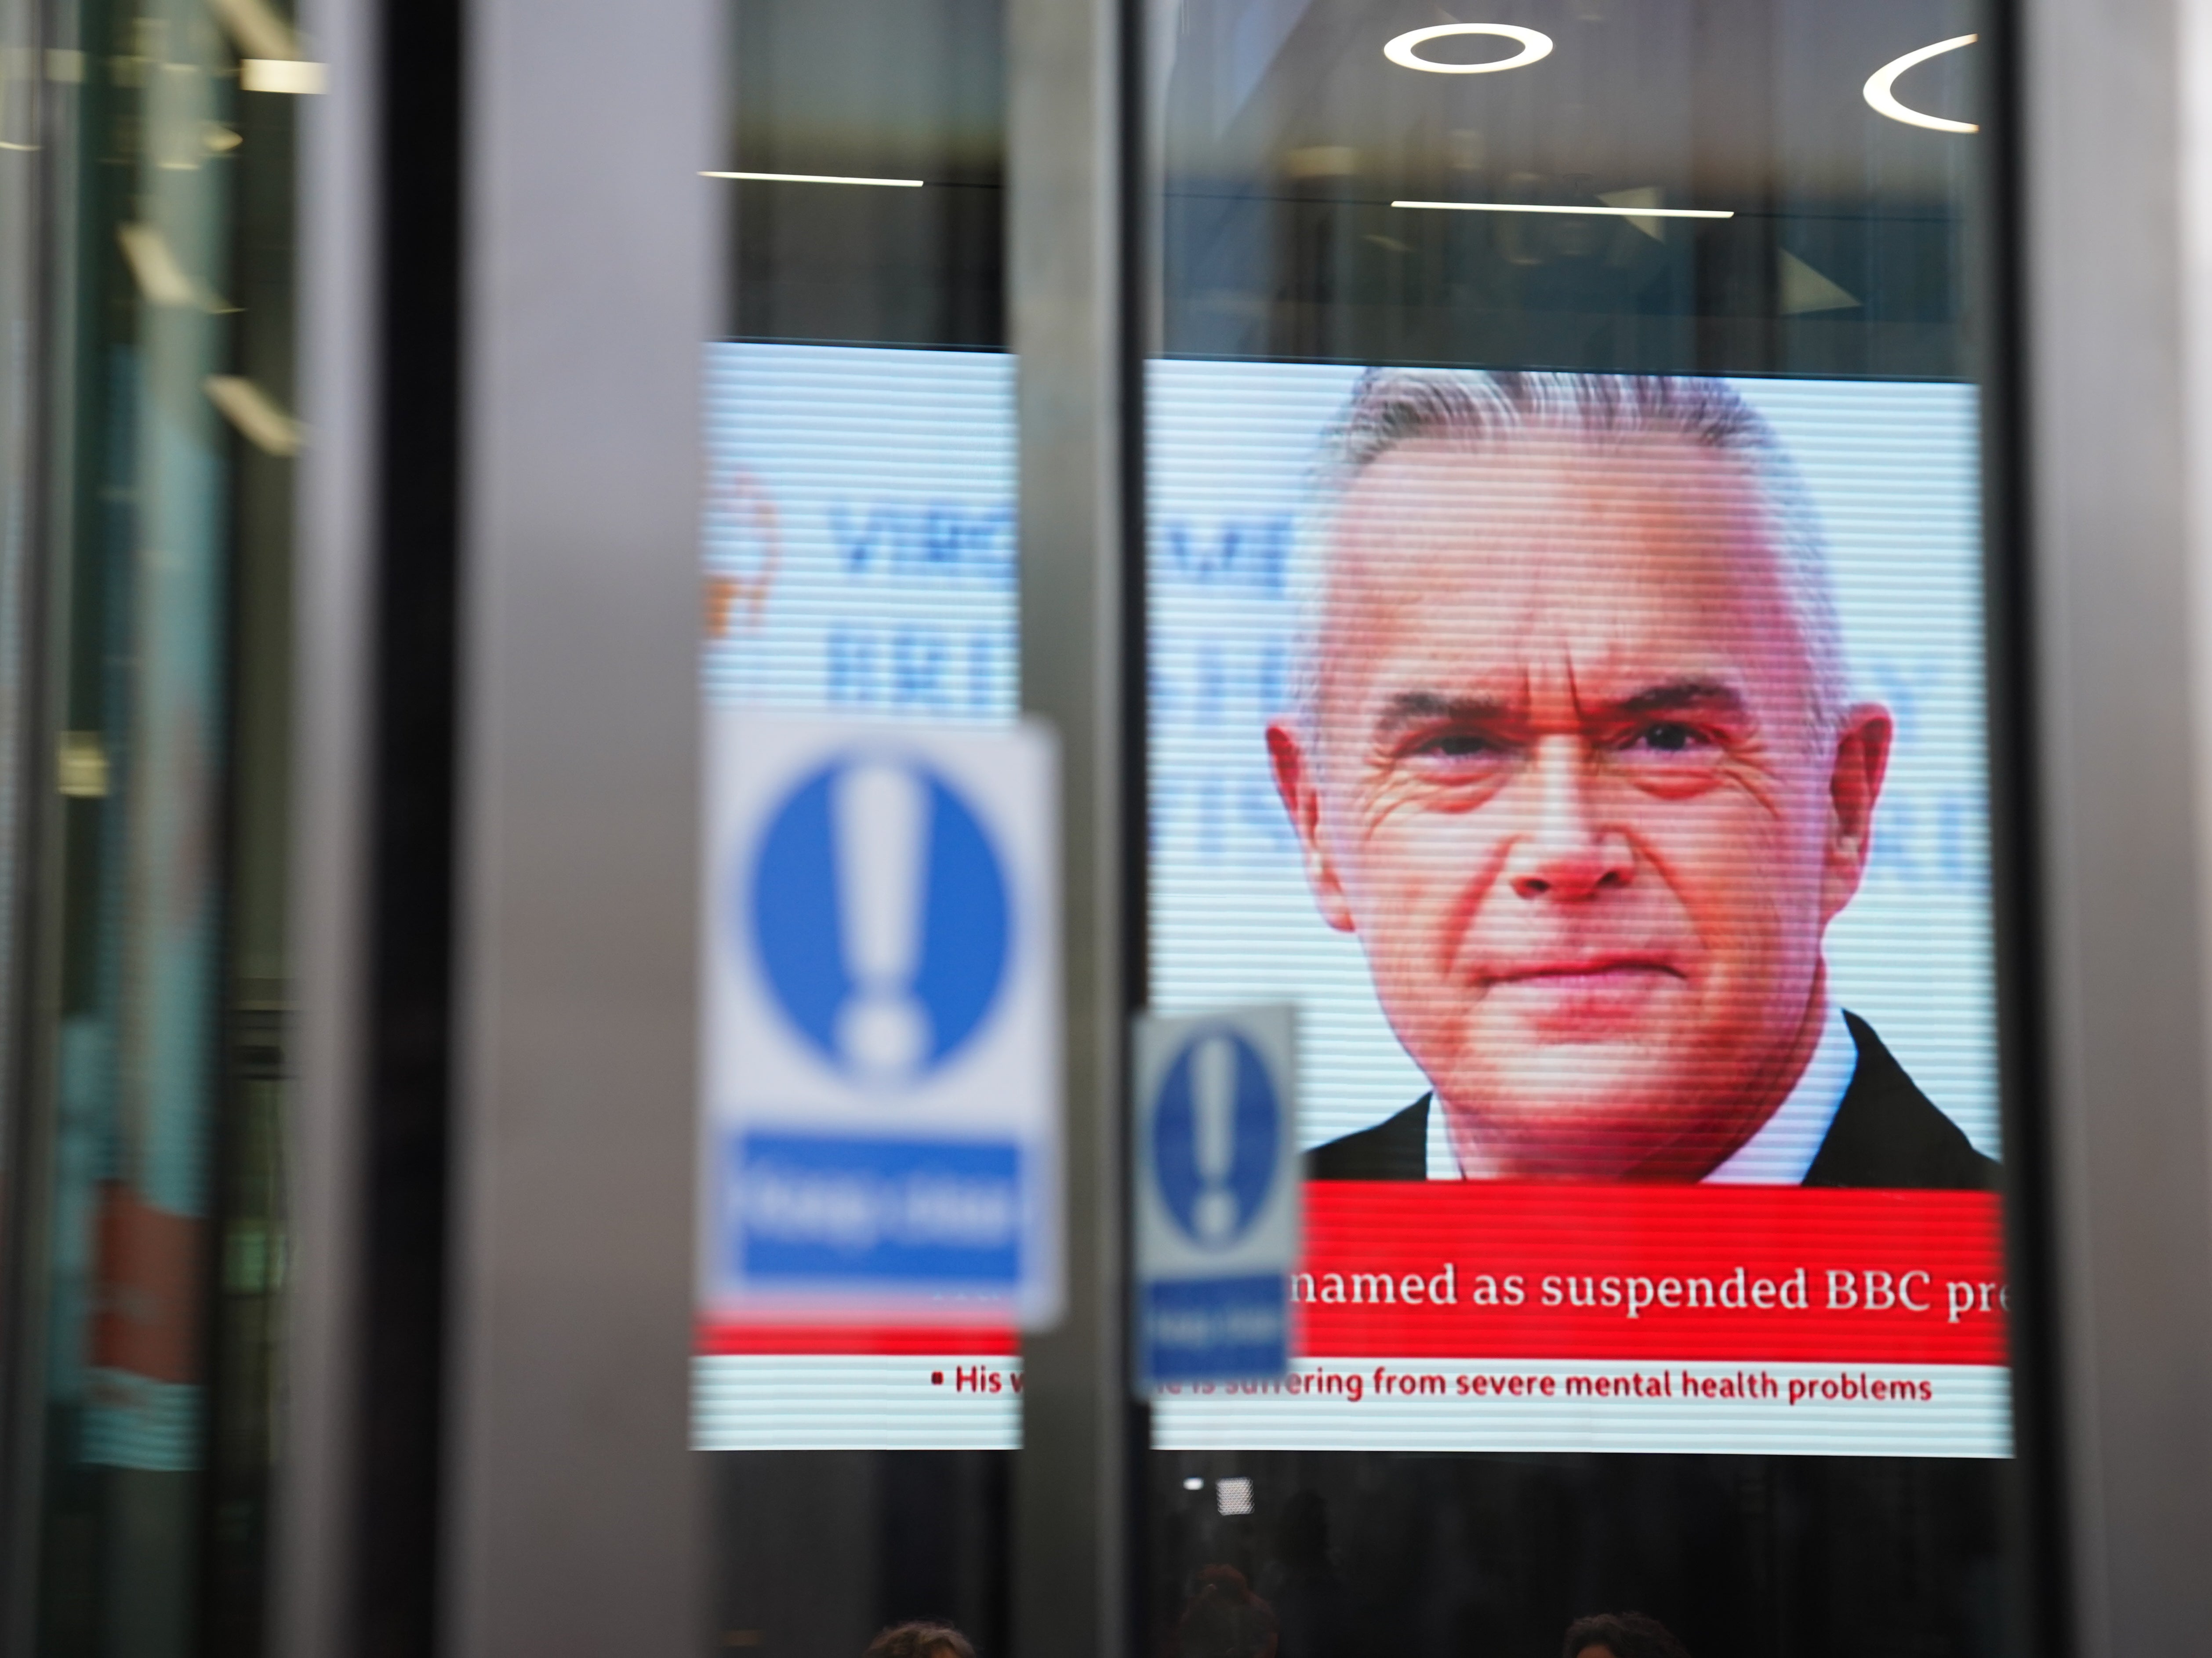 Huw Edwards in hospital as he is named in BBC sex scandal The Independent image picture